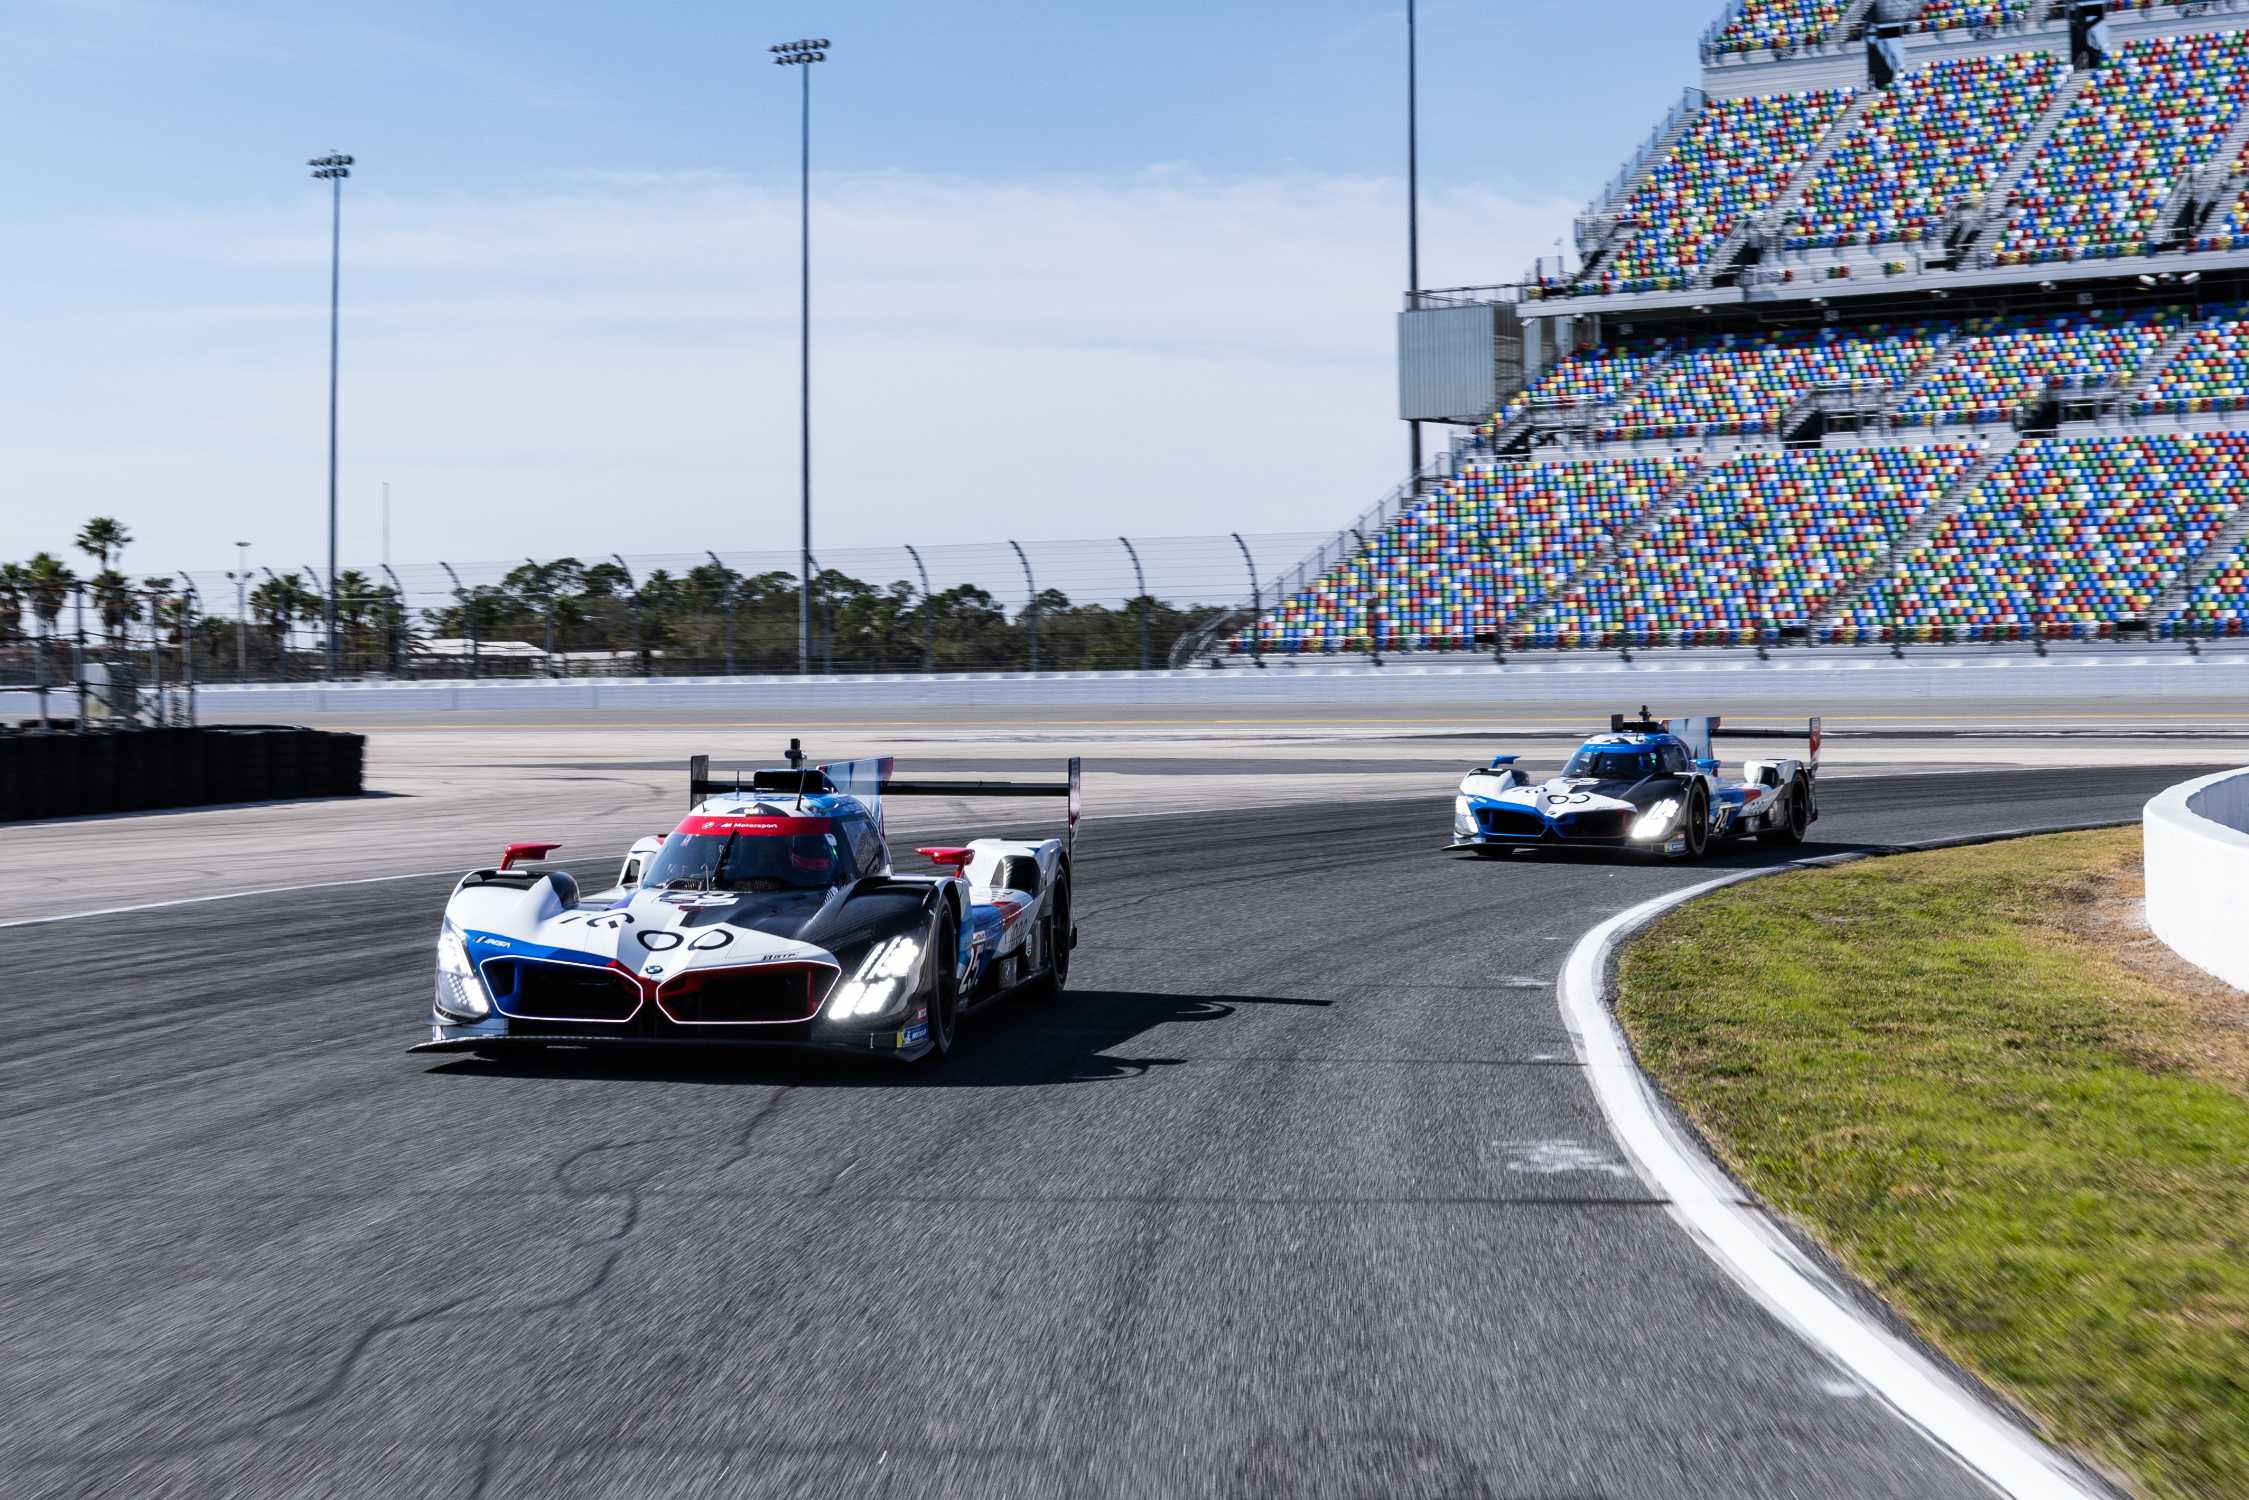 Preparations are complete for our LMP2 Rolex 24 debut at @daytona